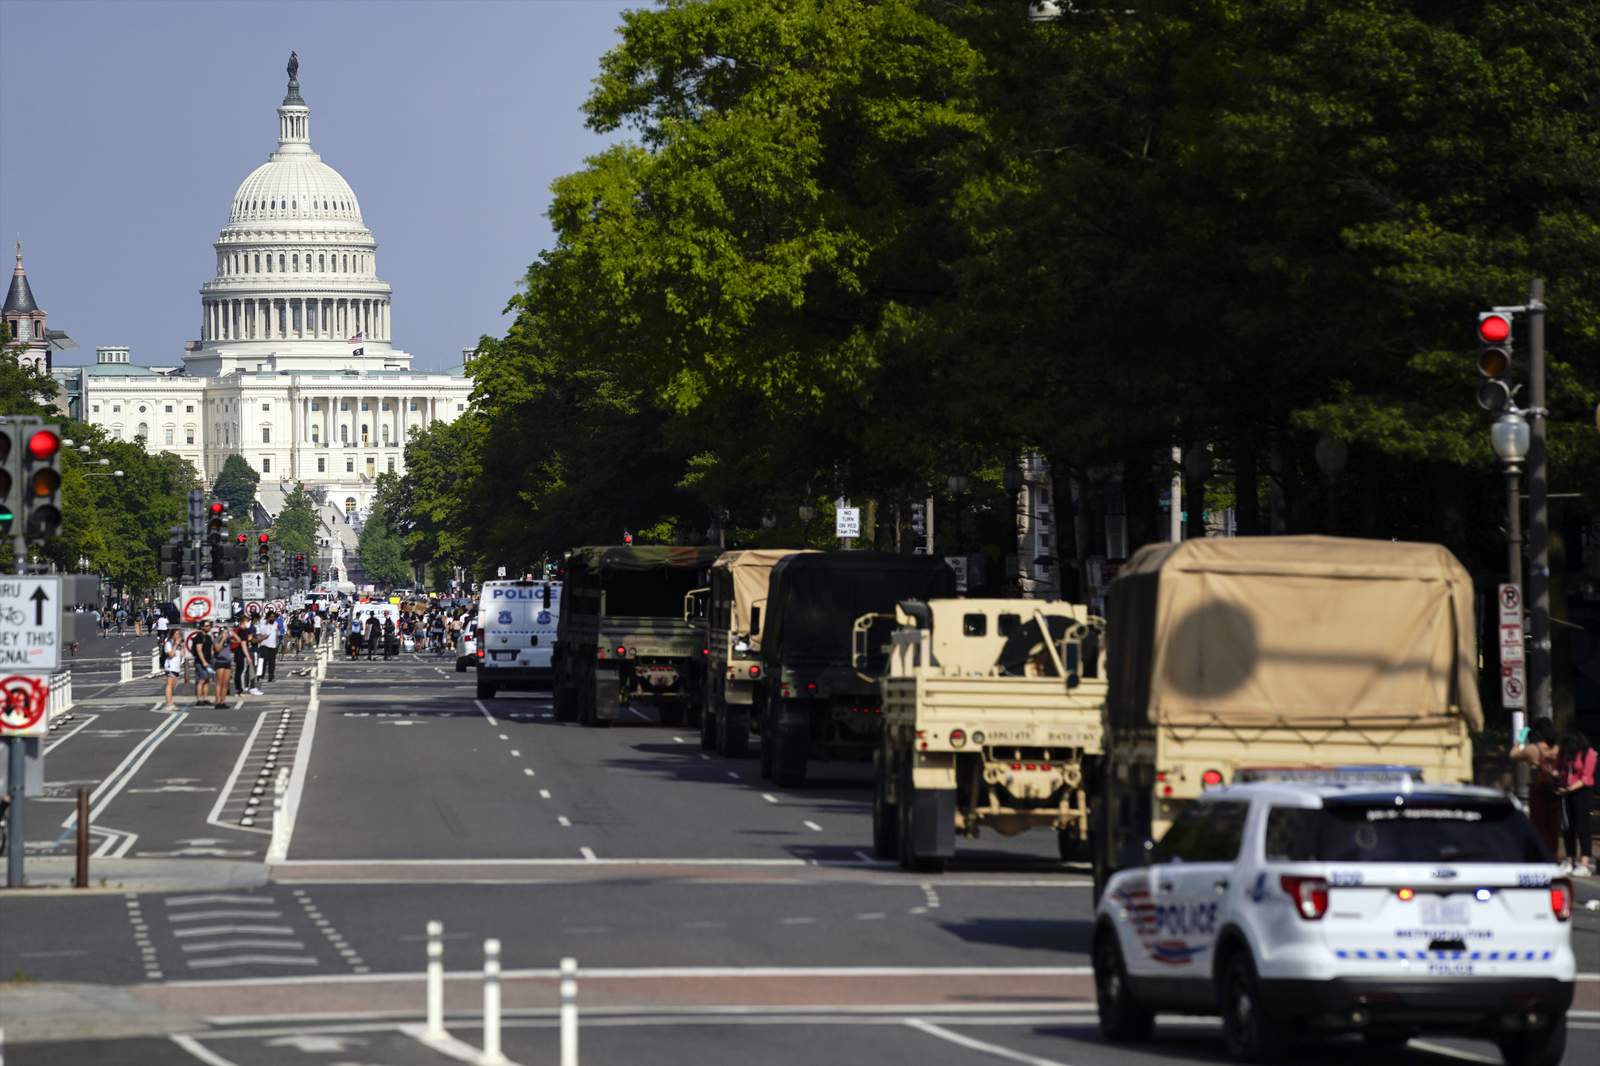 Active-duty troops deployed to DC region start to leave